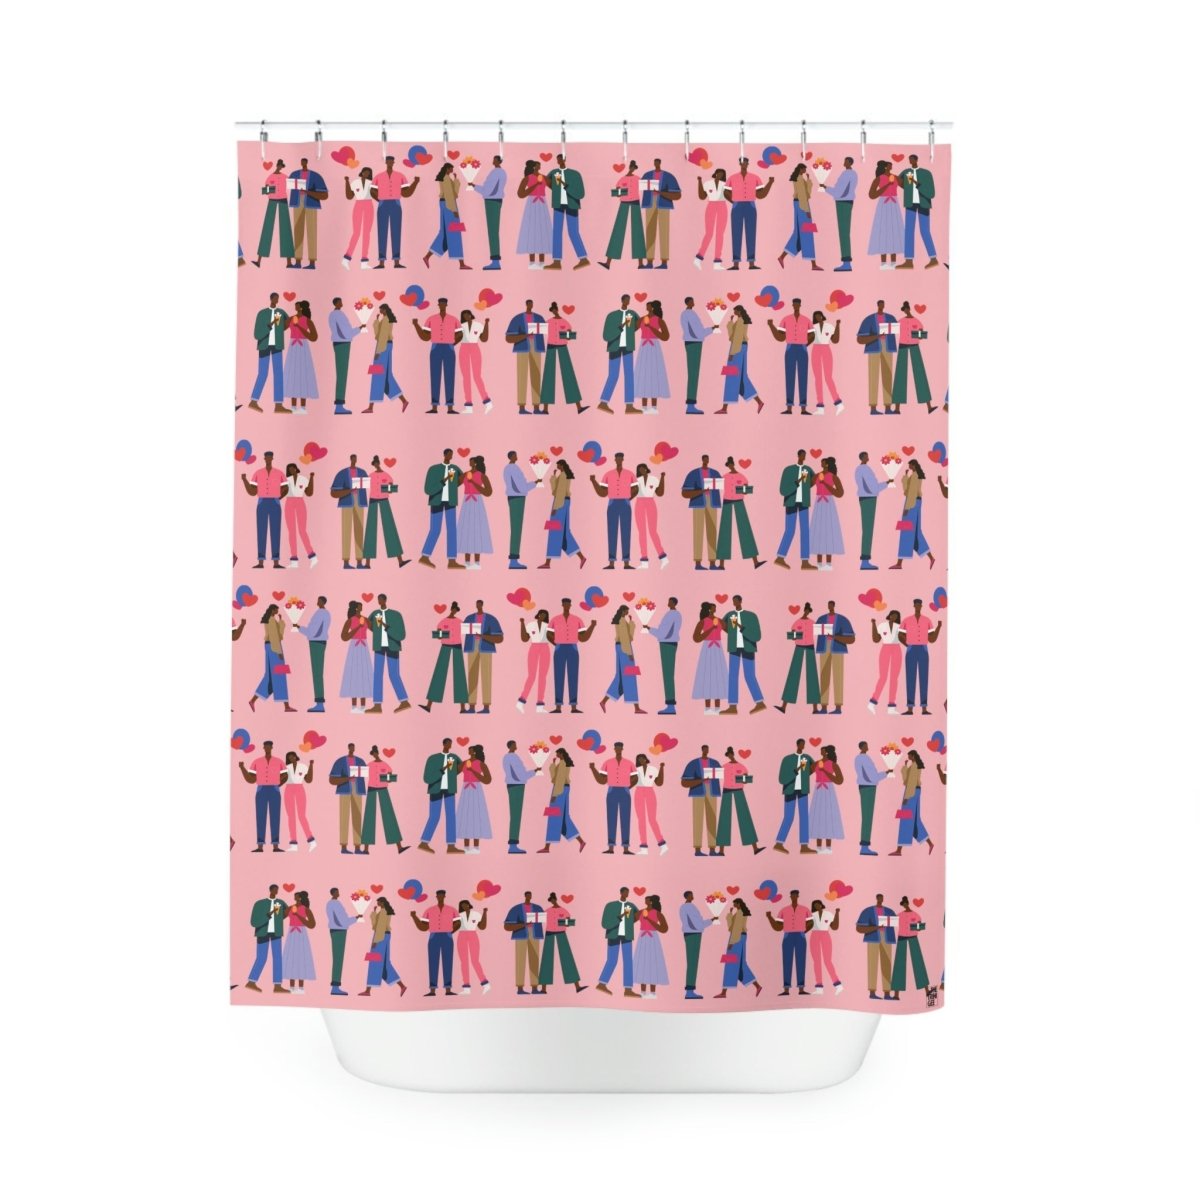 Love Couples Shower Curtain - The Trini Gee